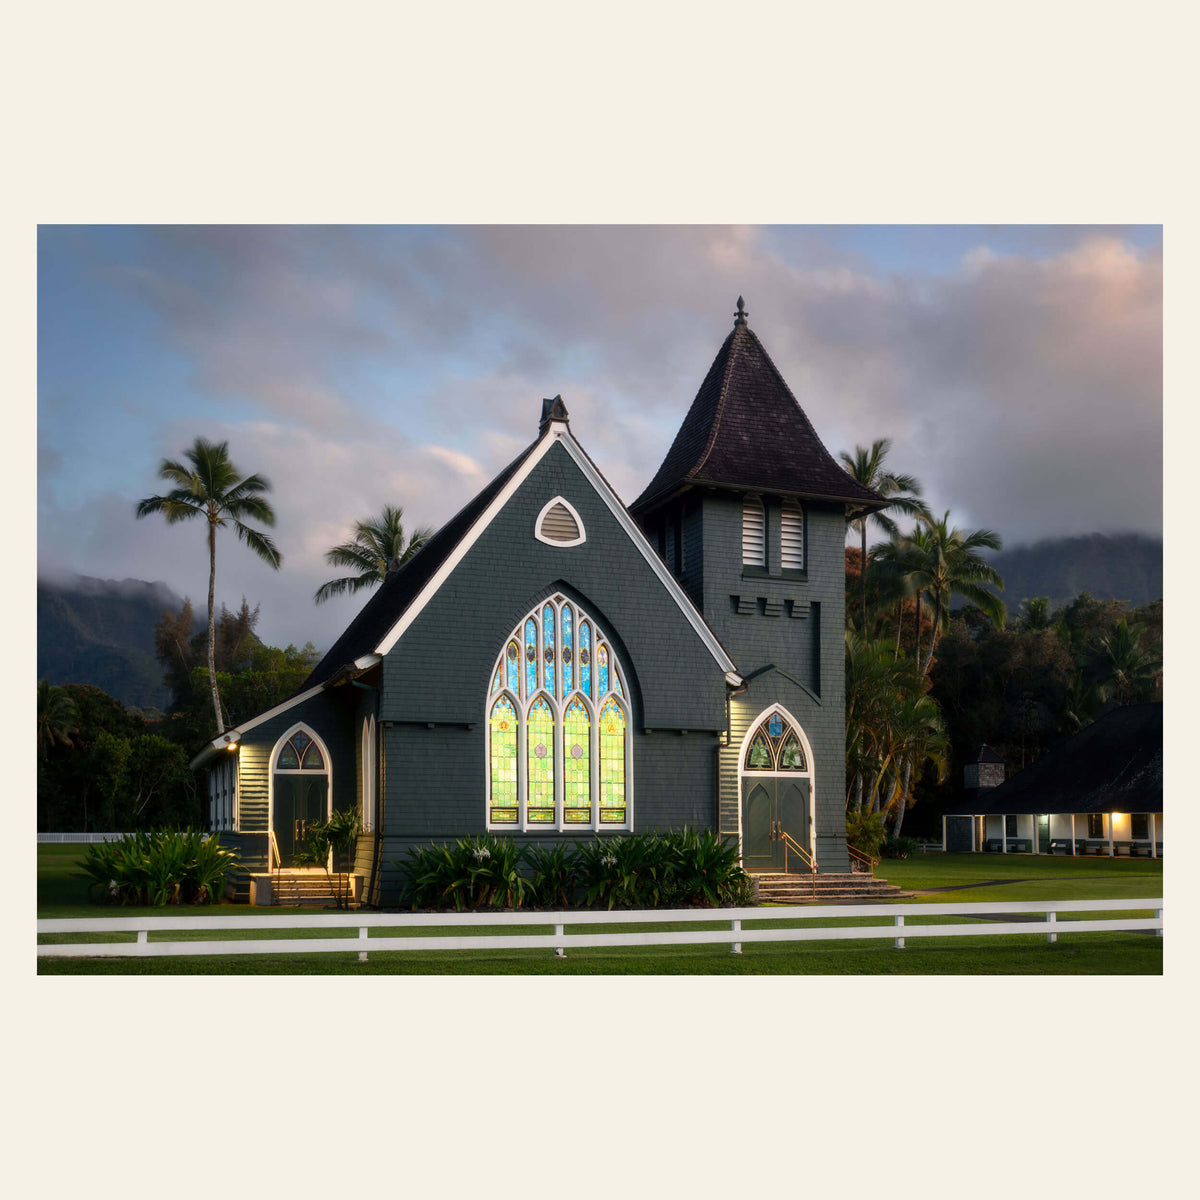 A picture of the church in Hanalei on Kauai.